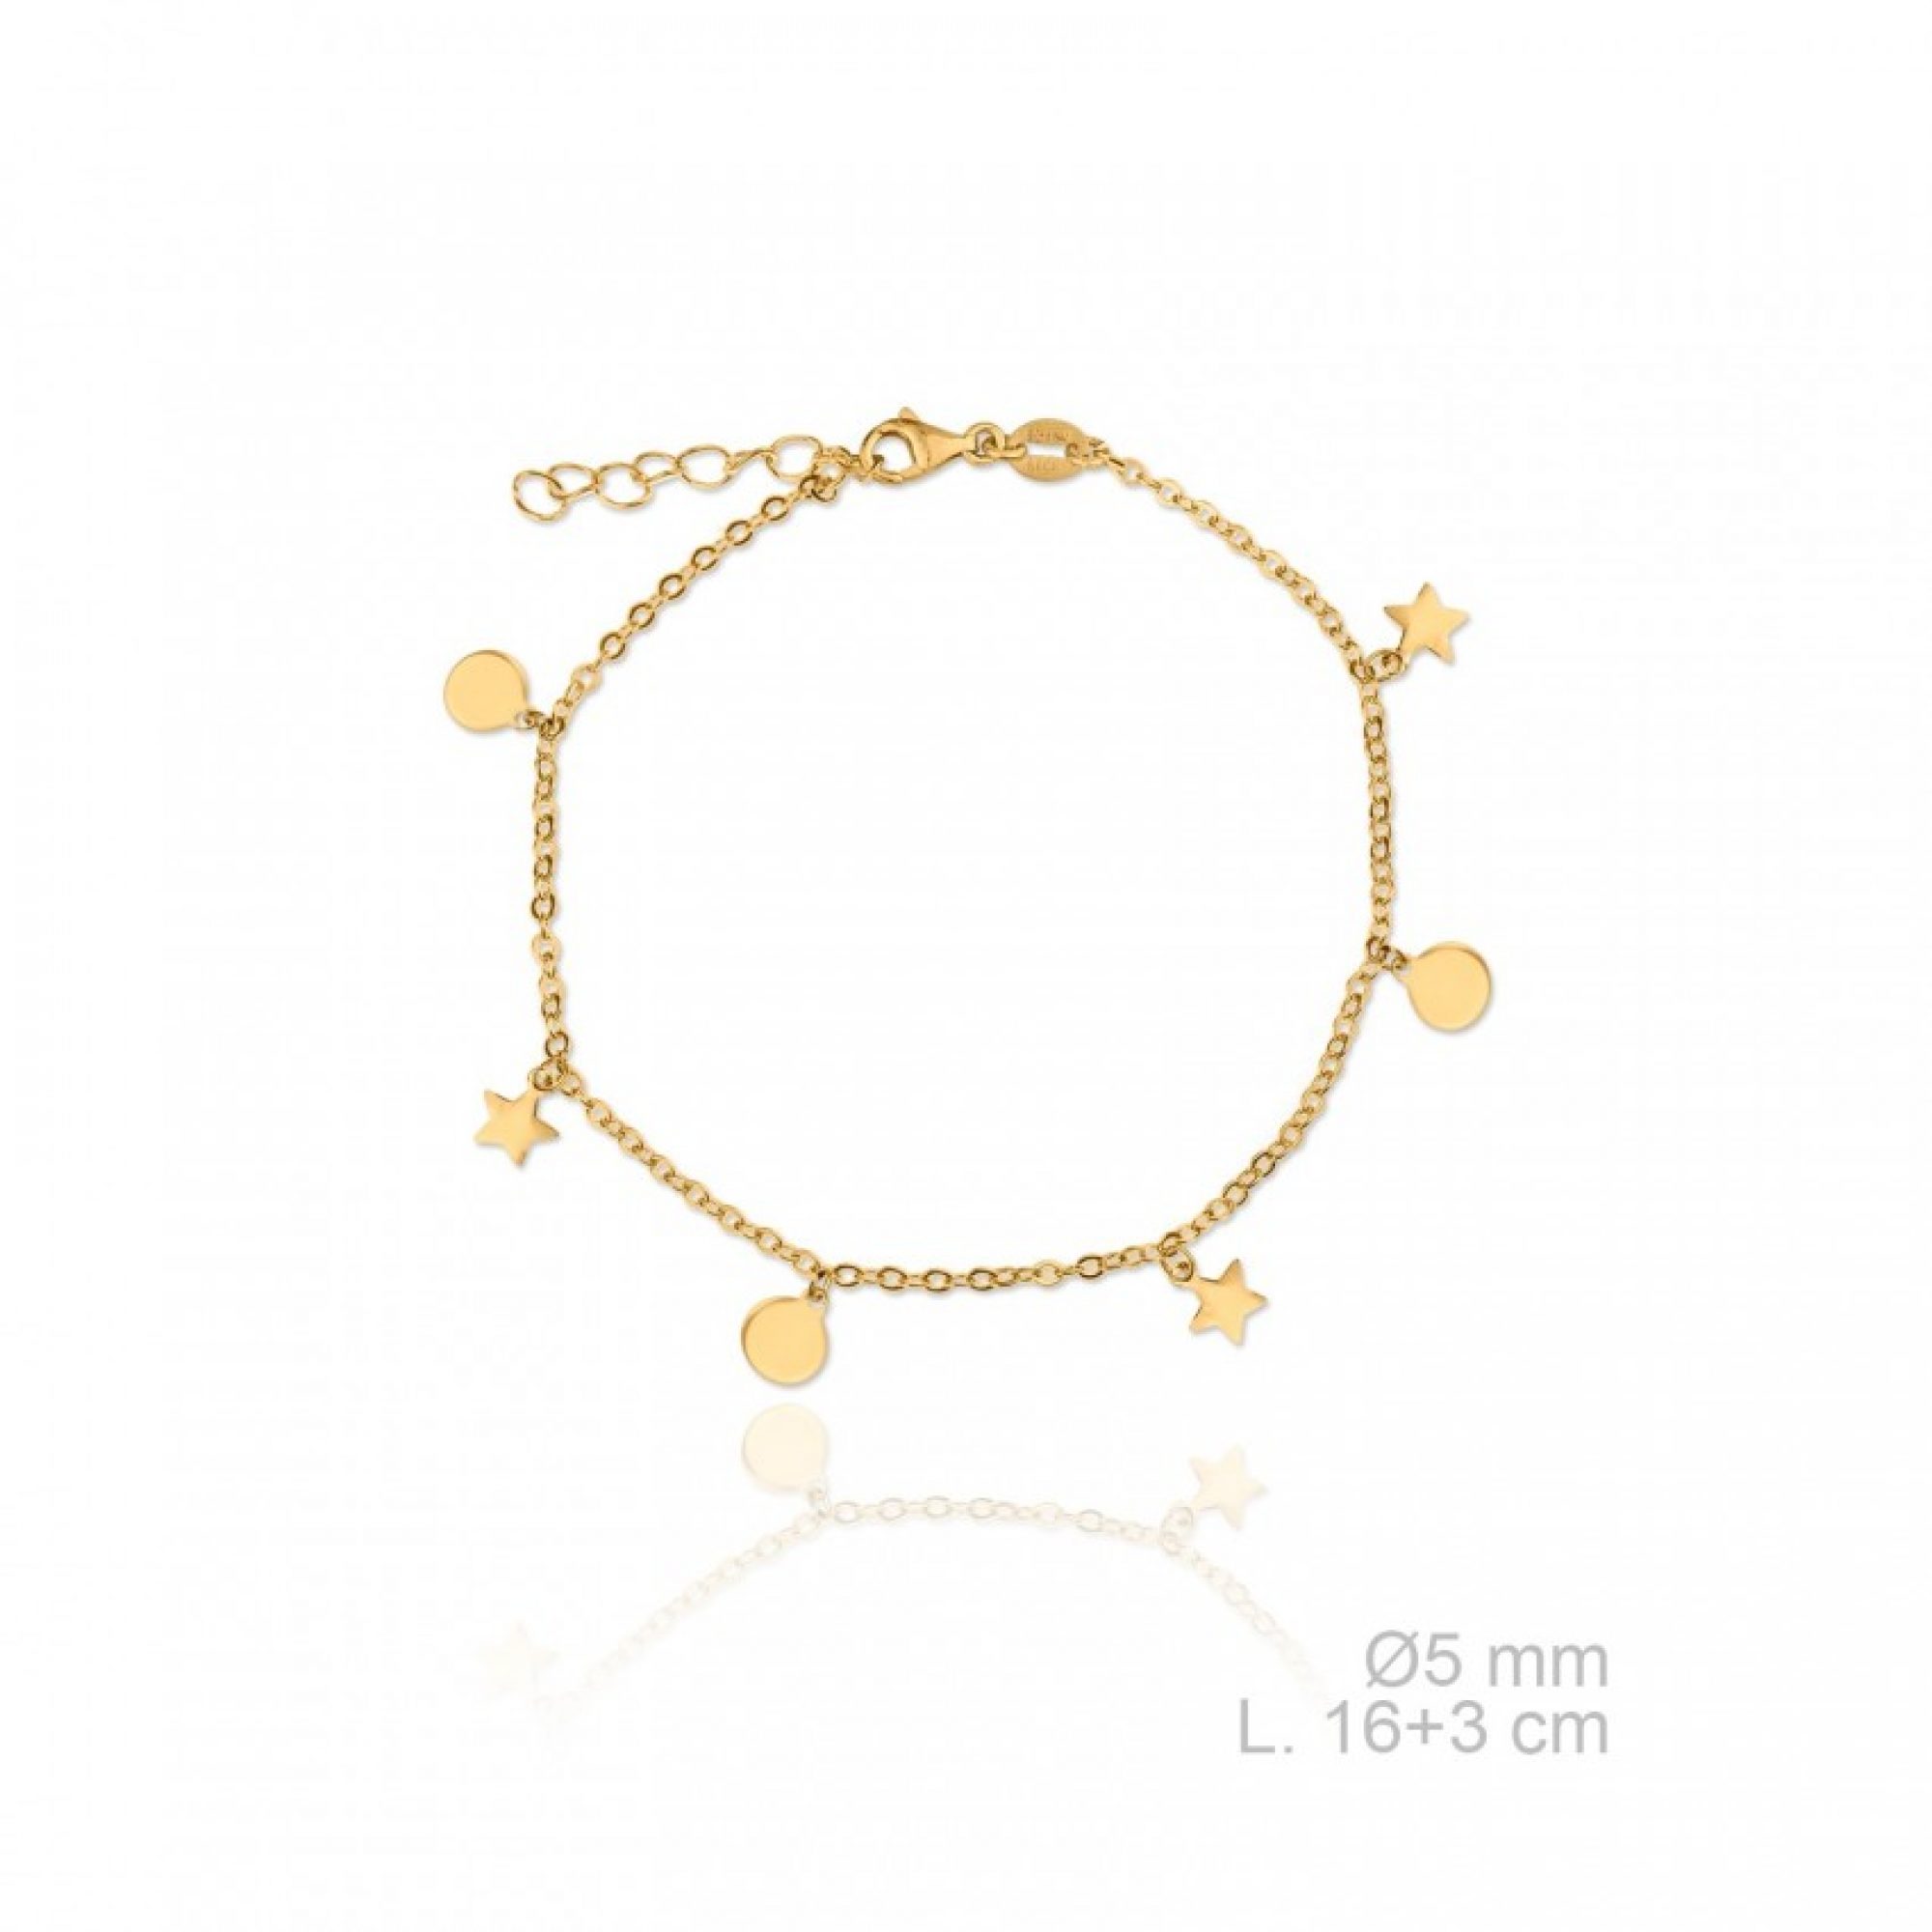 Gold plated bracelet with dangle stars and circles